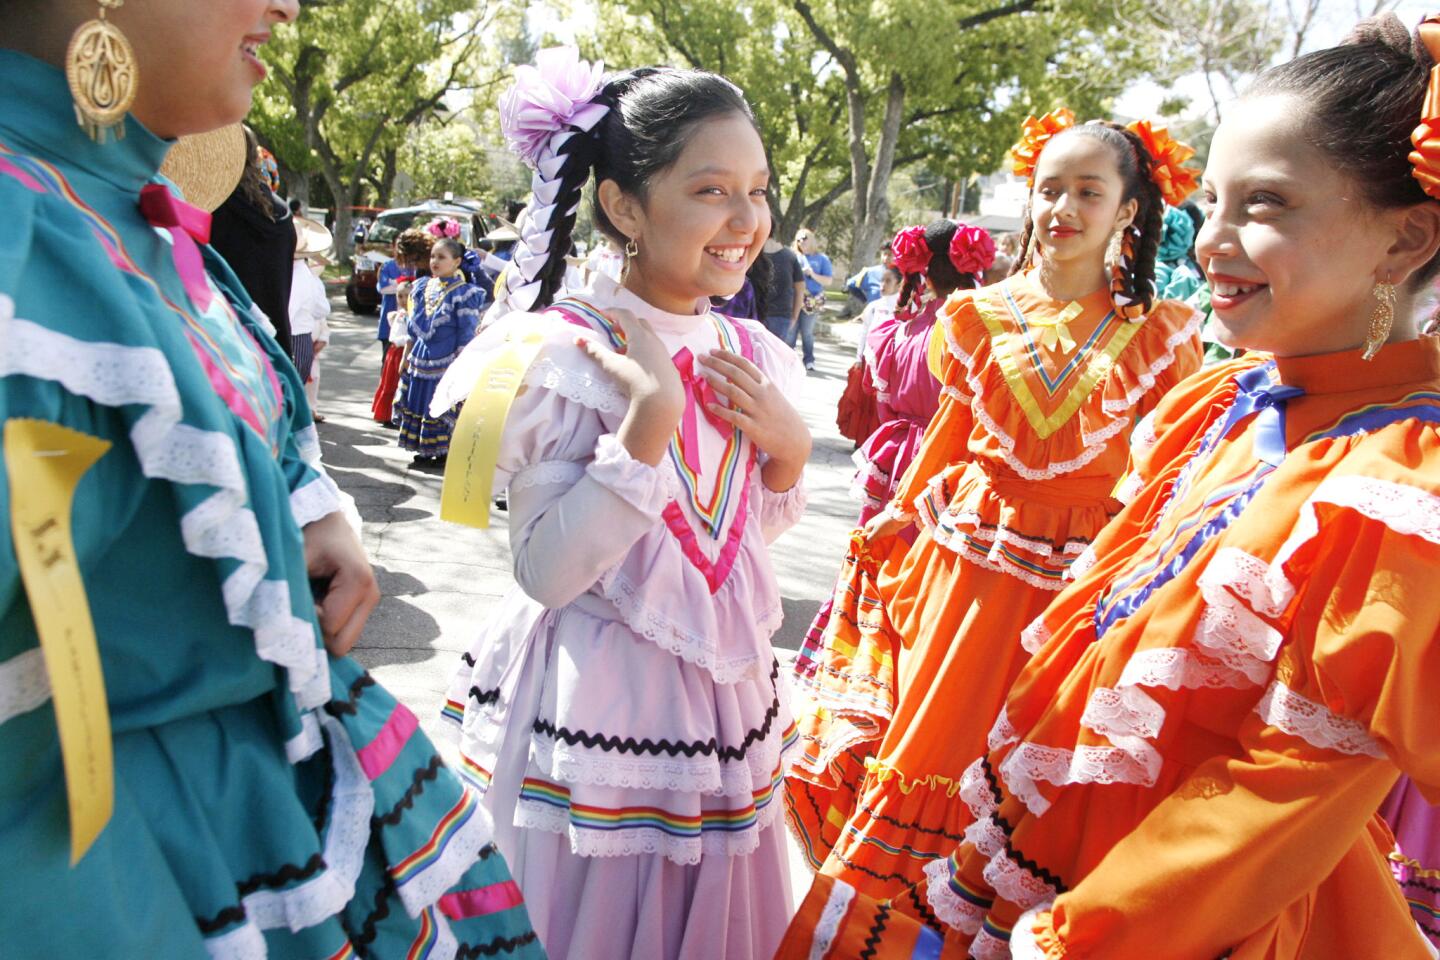 Isabella Gorinez, 10, center, and other members of Ballet Folklorico Mexico Azteca participate in Burbank on Parade, which took place on Olive Ave. between Keystone St. and Lomita St. on Saturday, April 14, 2012.